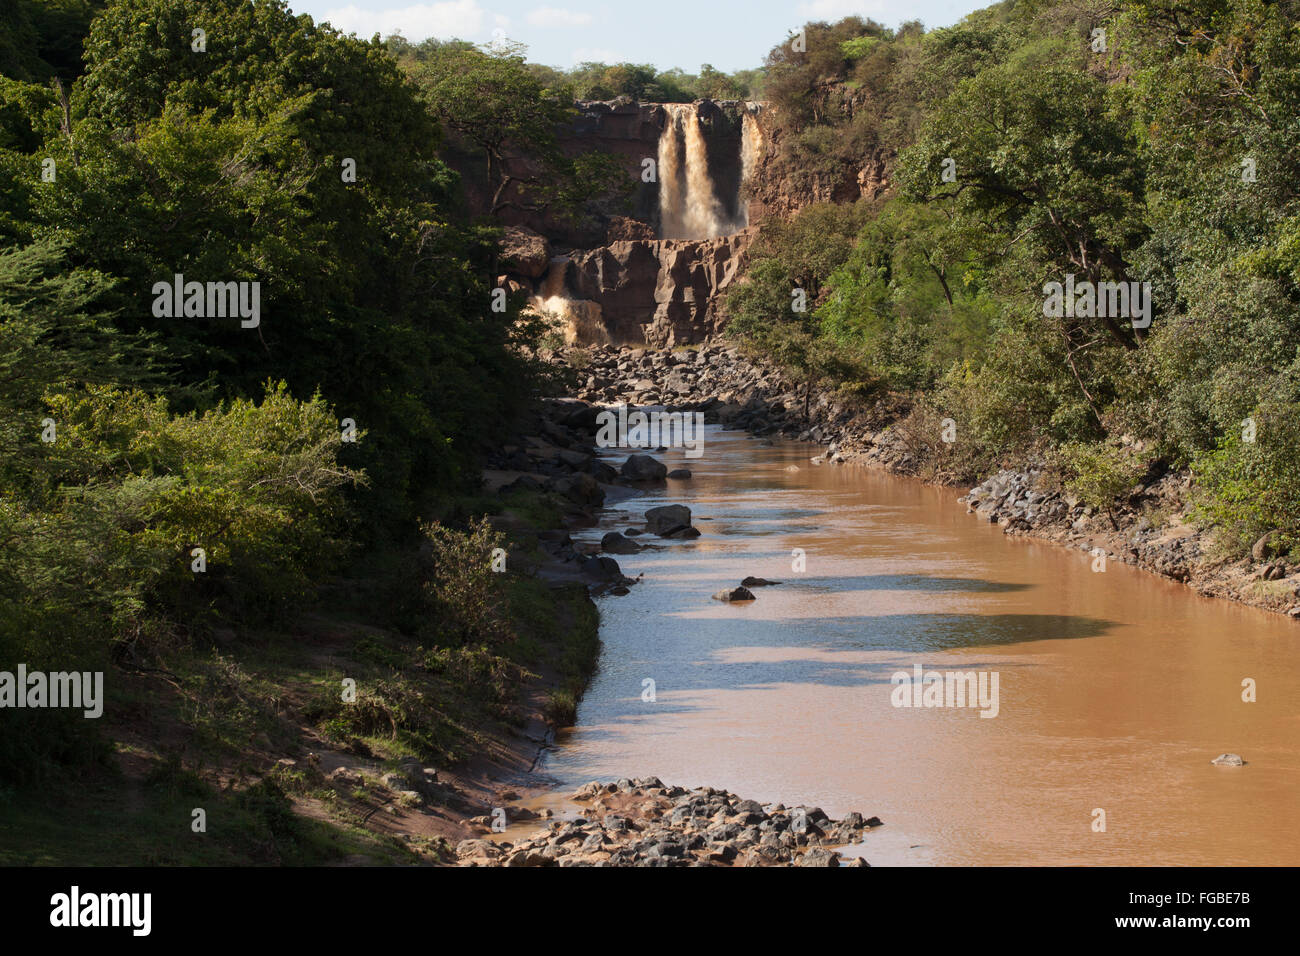 A view of a waterfall cascading into a river, Ethiopia Africa Stock Photo